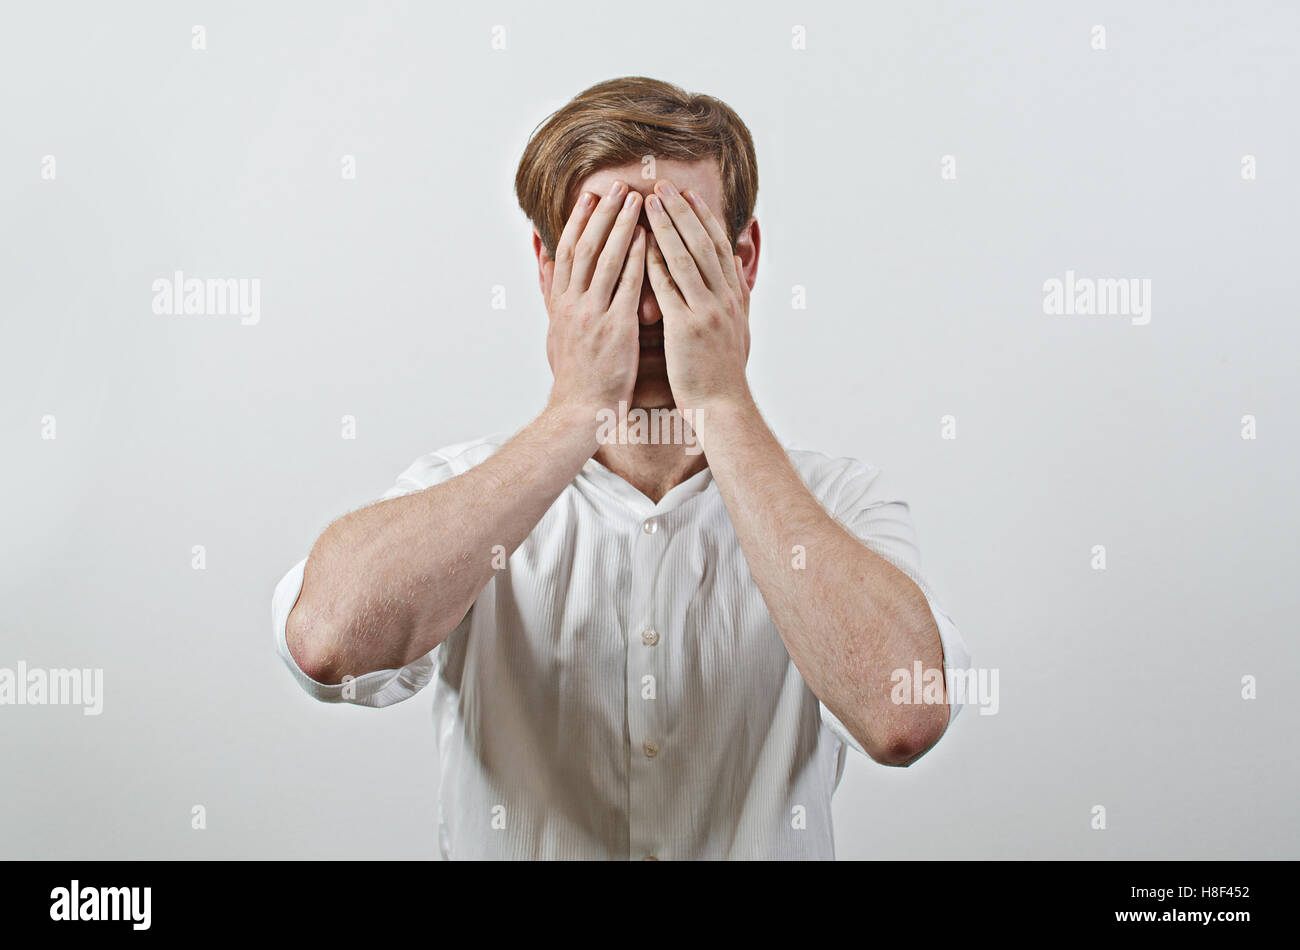 Young Adult Male Wearing White Shirt Covers His Face by Both Hands, Gesturing He Has Made a Big Mistake Stock Photo